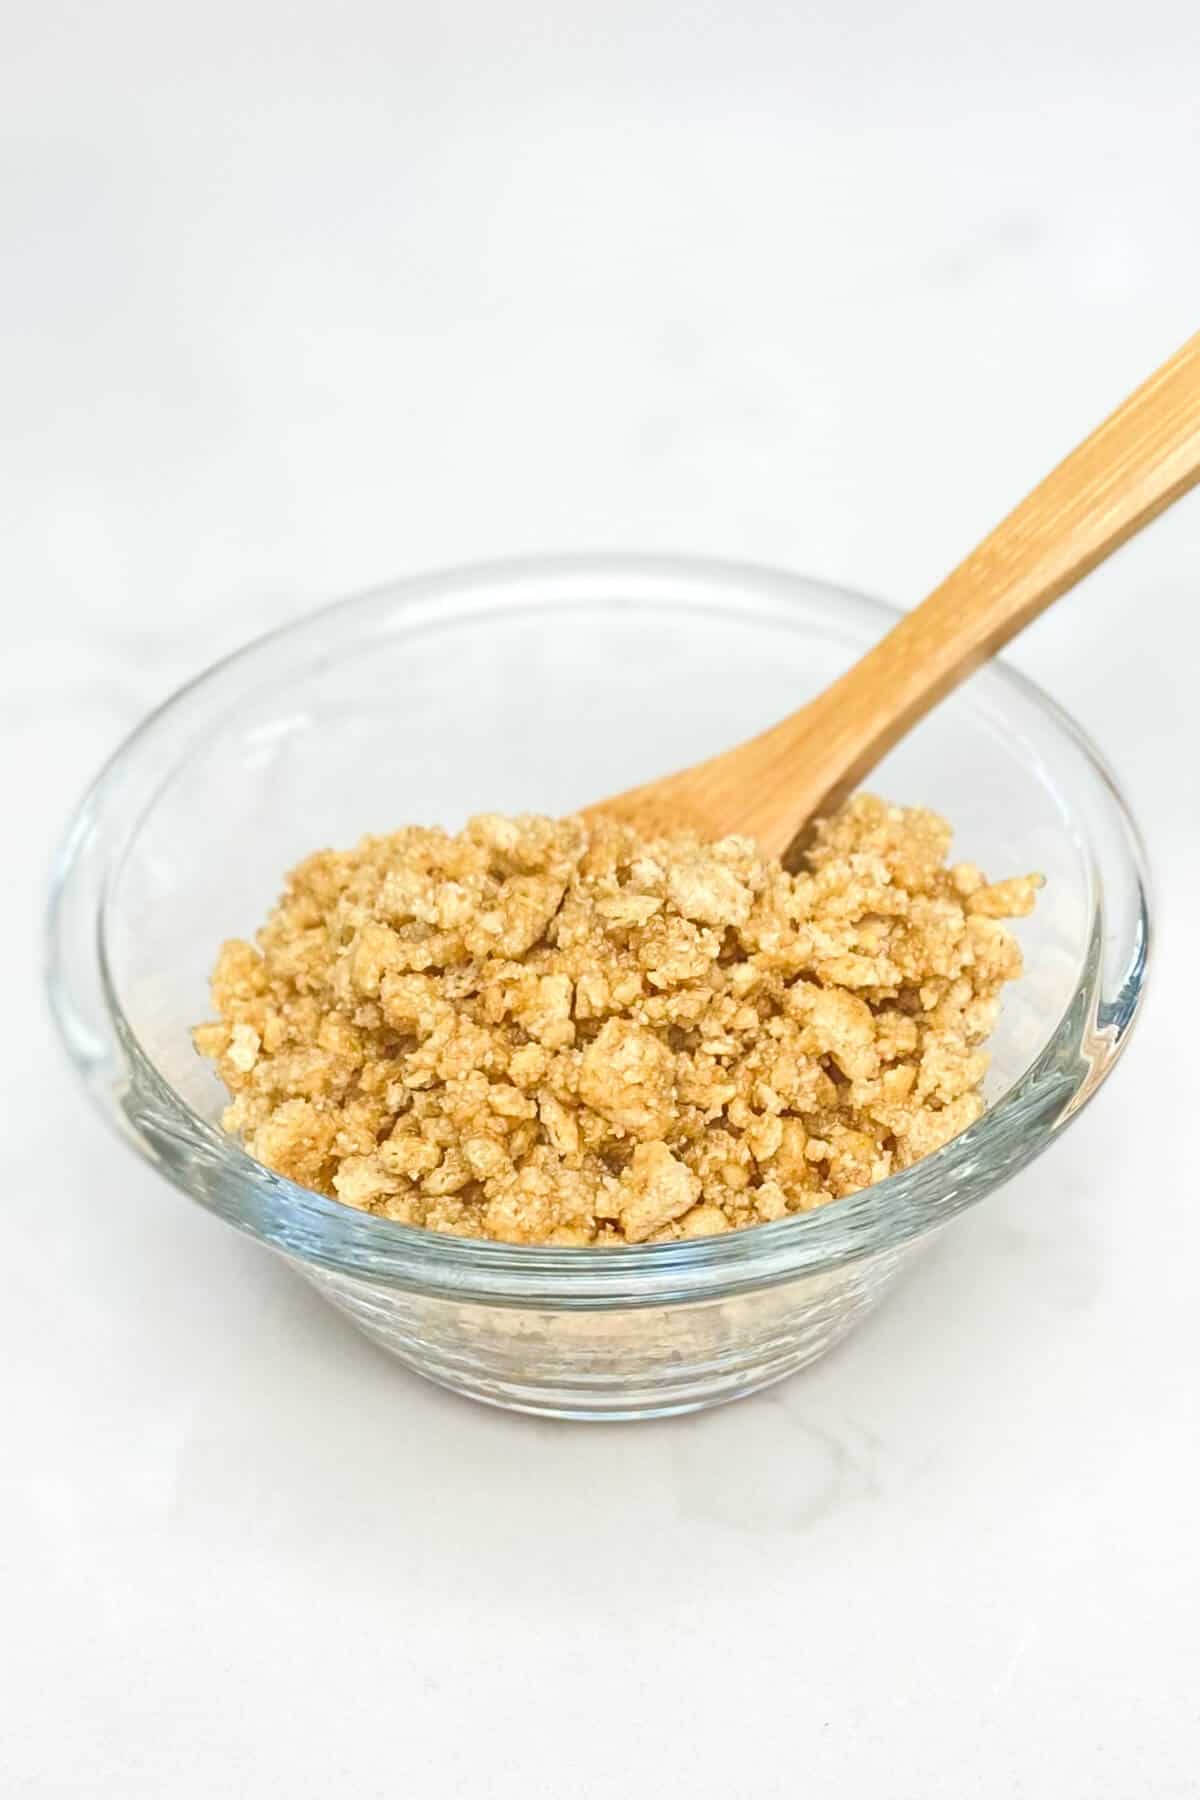 Graham cracker crumbs mixed with butter in a small glass bowl